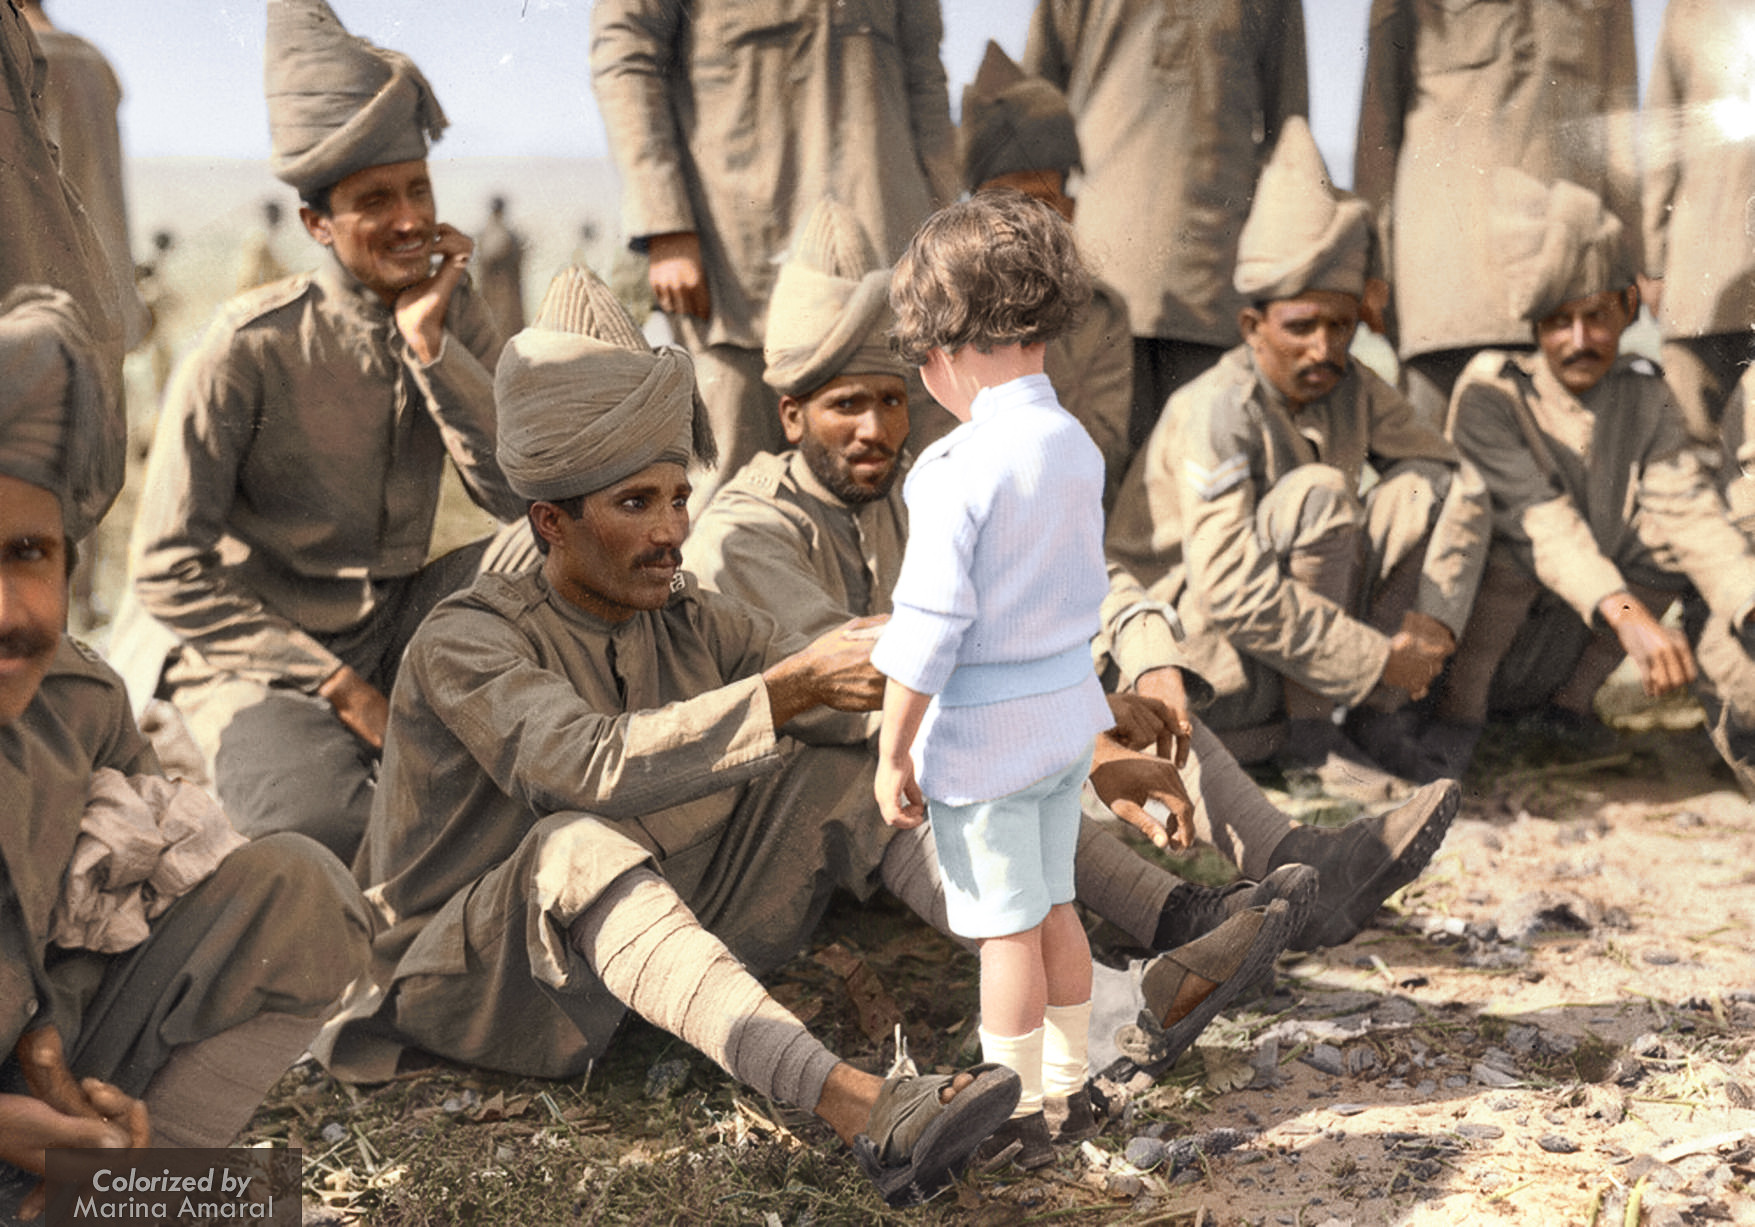 Indian Colonial troops meet a young British Boy during the First World War.